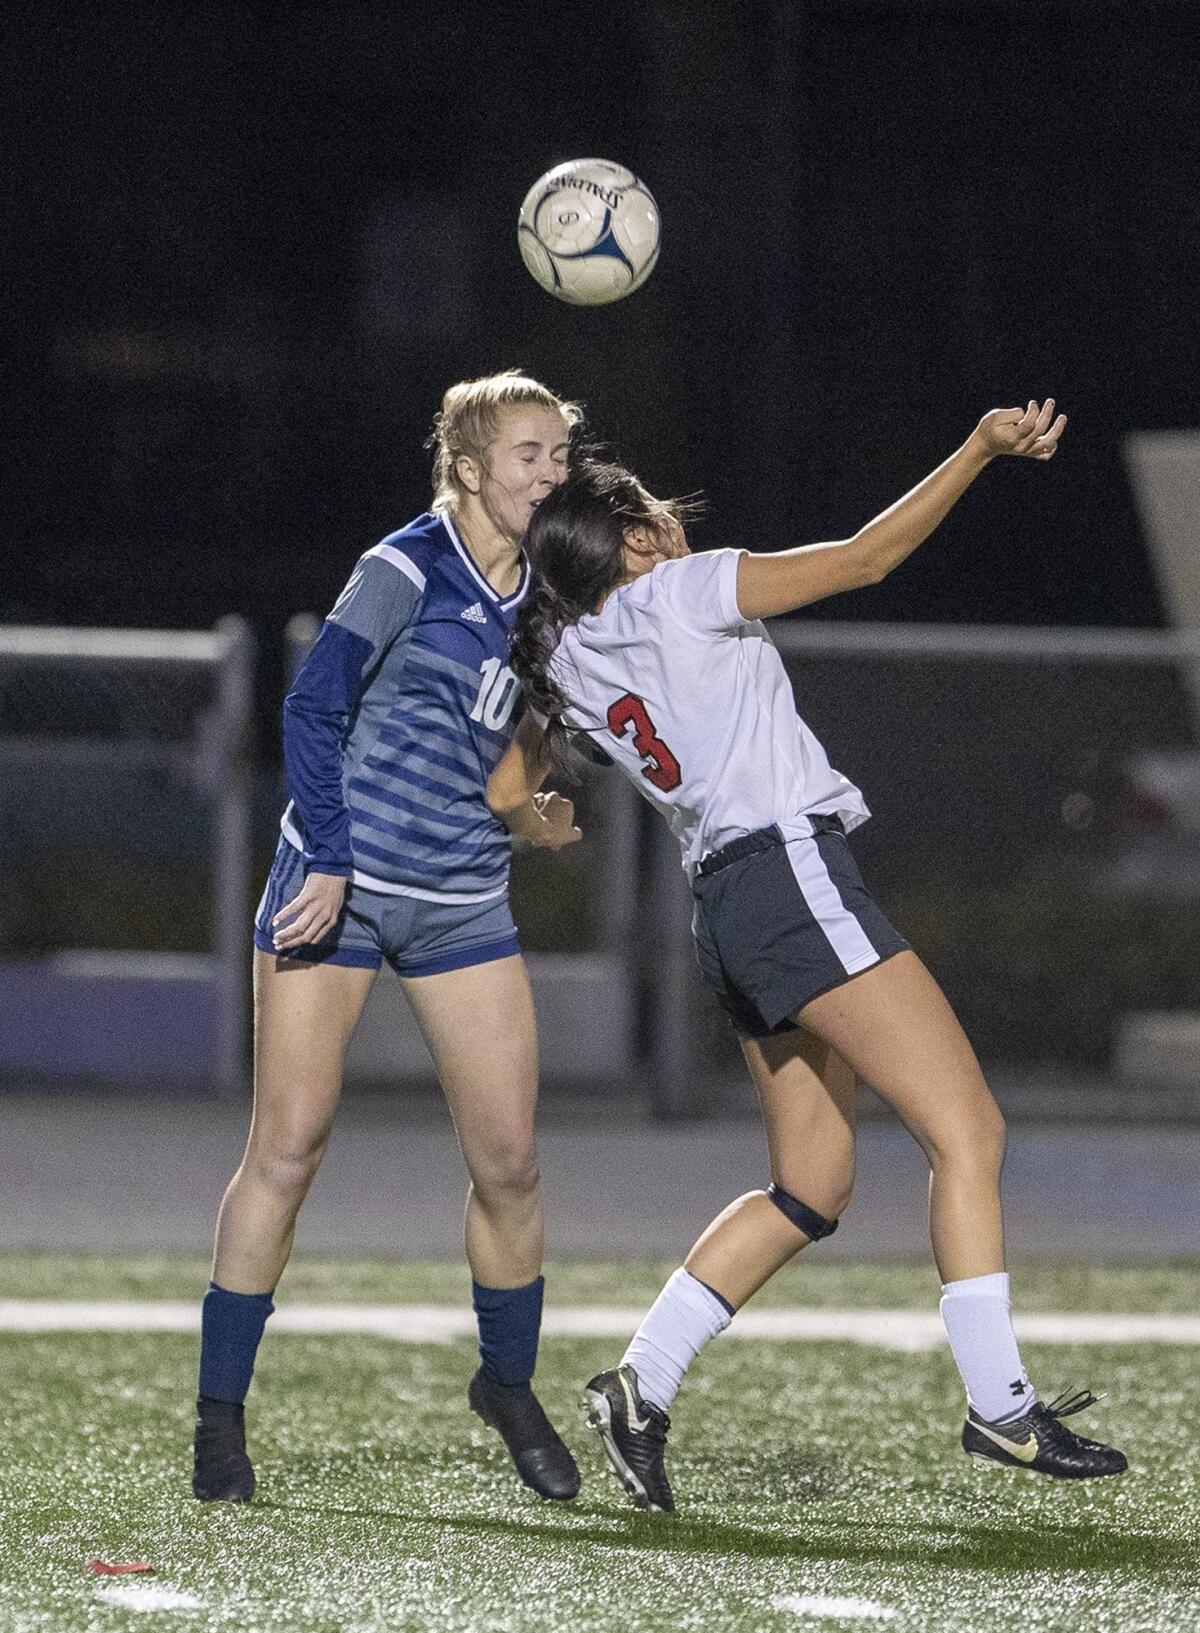 Newport Harbor High's Mackenzee Blaser, left, goes up for a header against Mission Viejo's Madilyn Fawcett in the first round of the CIF Southern Section Division 1 playoffs on Wednesday.